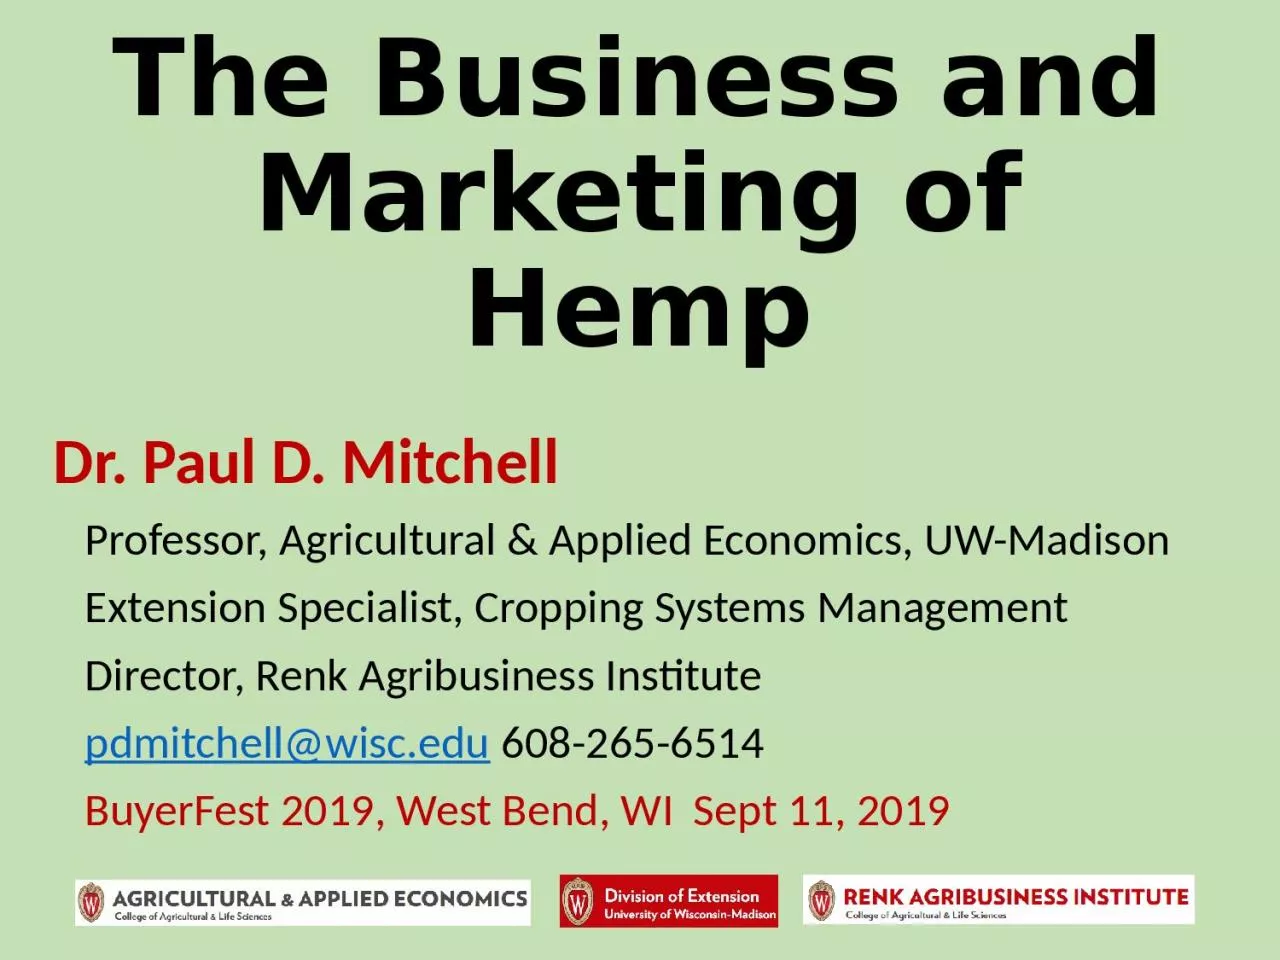 The Business and Marketing of Hemp